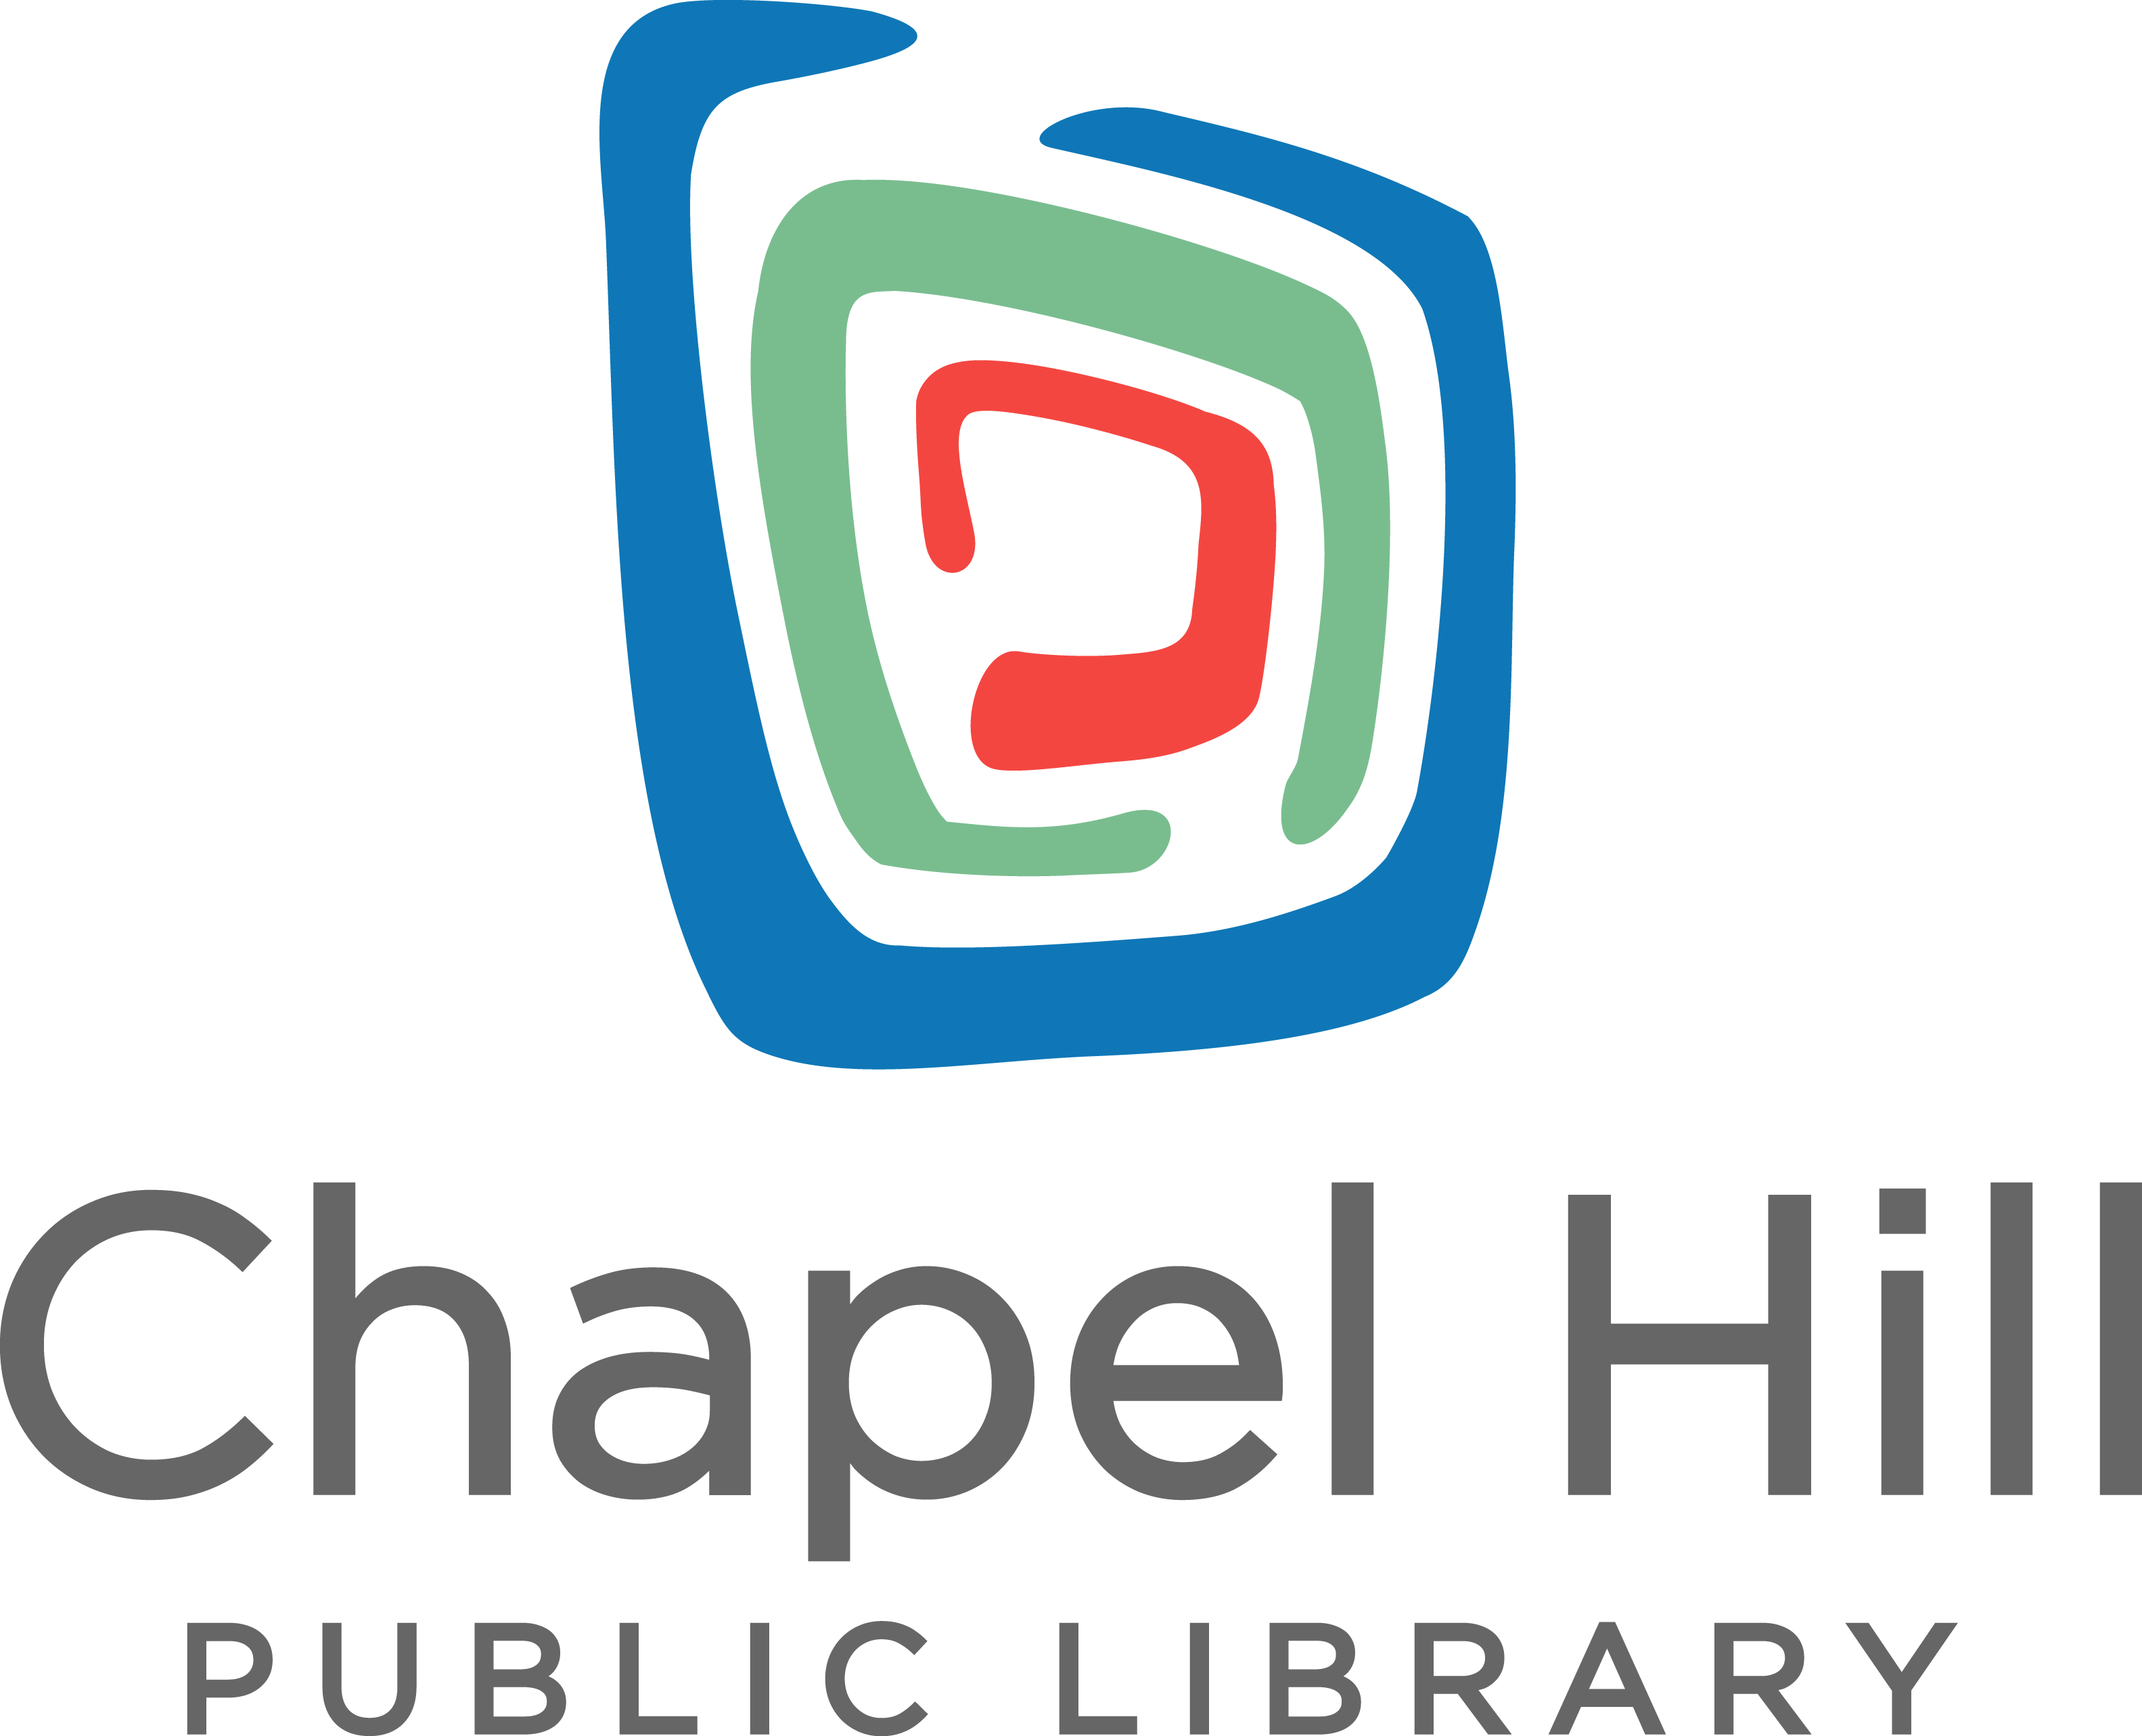 Https Chapelhillpubliclibrary Org Greenscreen 2016 02 17t20 34 55z Https Chapelhillpubliclibrary Org Wp Content Uploads 2016 02 Greenscreen E1455741219666 Jpg Greenscreen Https Chapelhillpubliclibrary Org Medialab1 2016 04 19t16 52 43z Https - logo3 roblox developer logo png image with transparent background toppng